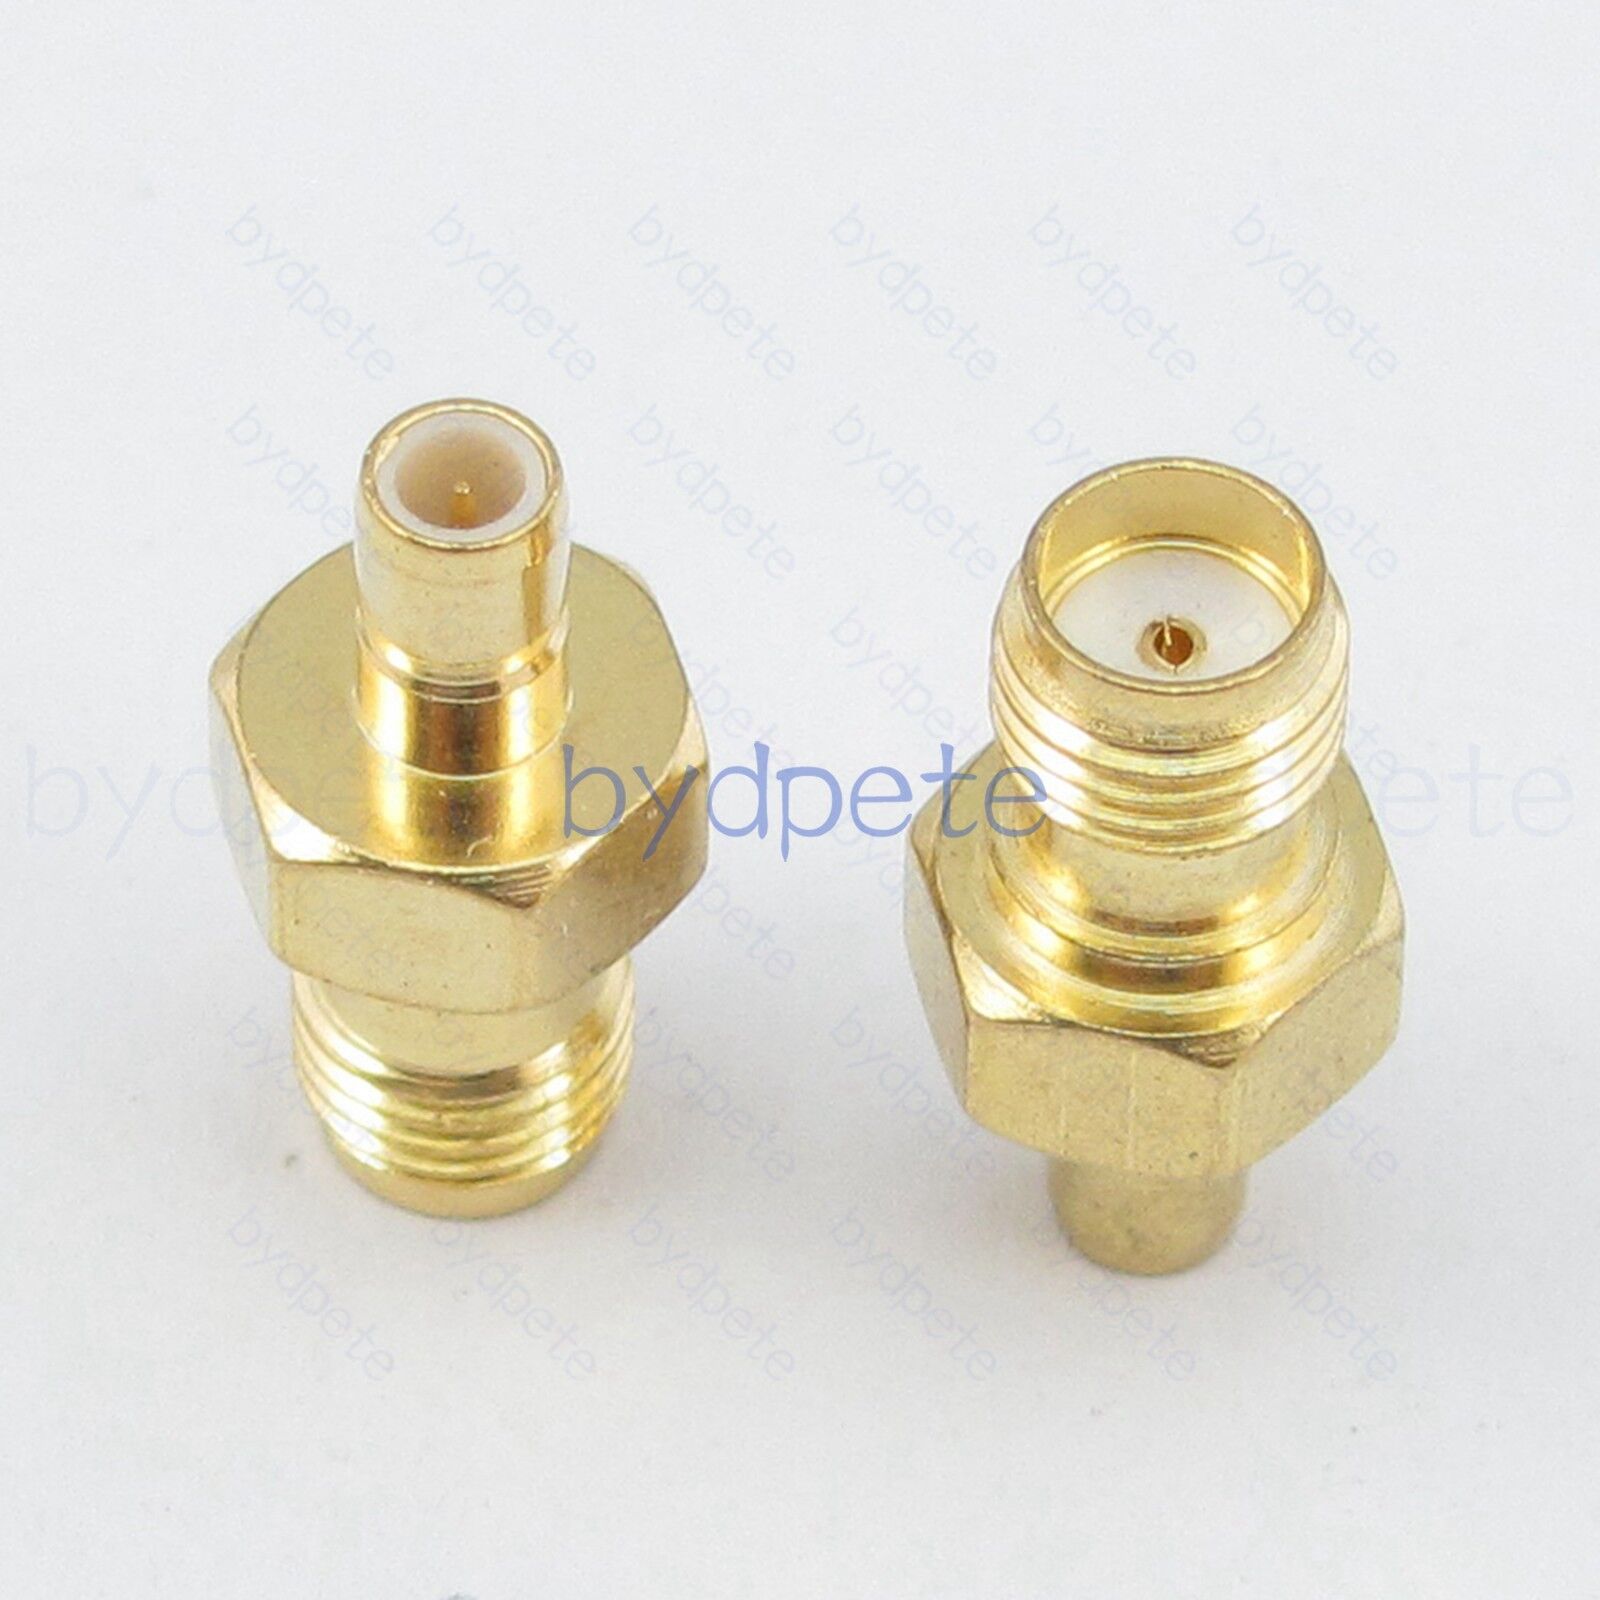 SMB Male Plug to SMA Female Jack Straight RF Connector Adapter bydpete BYDB272SMB